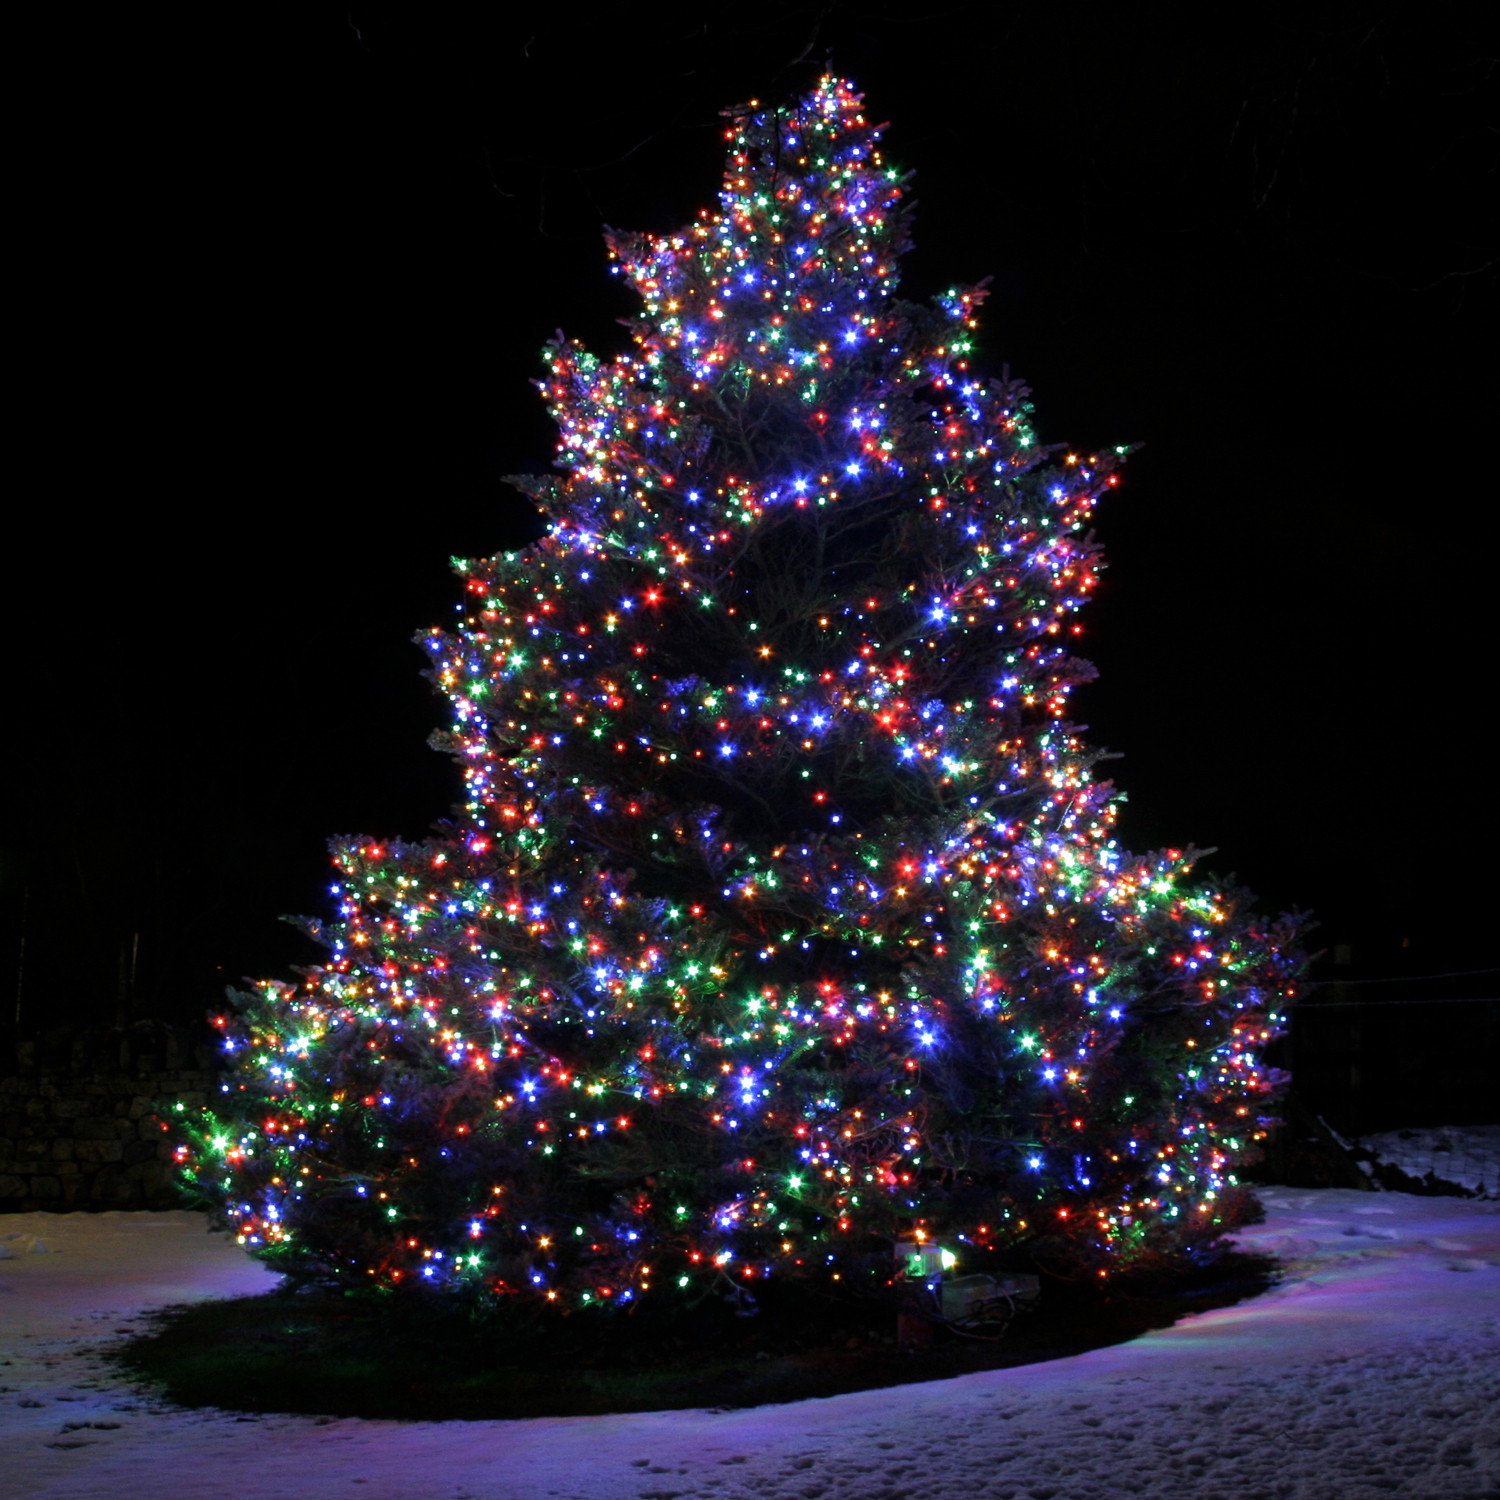 Outdoor Christmas Tree With Lights
 10 things to consider before installing Christmas lights